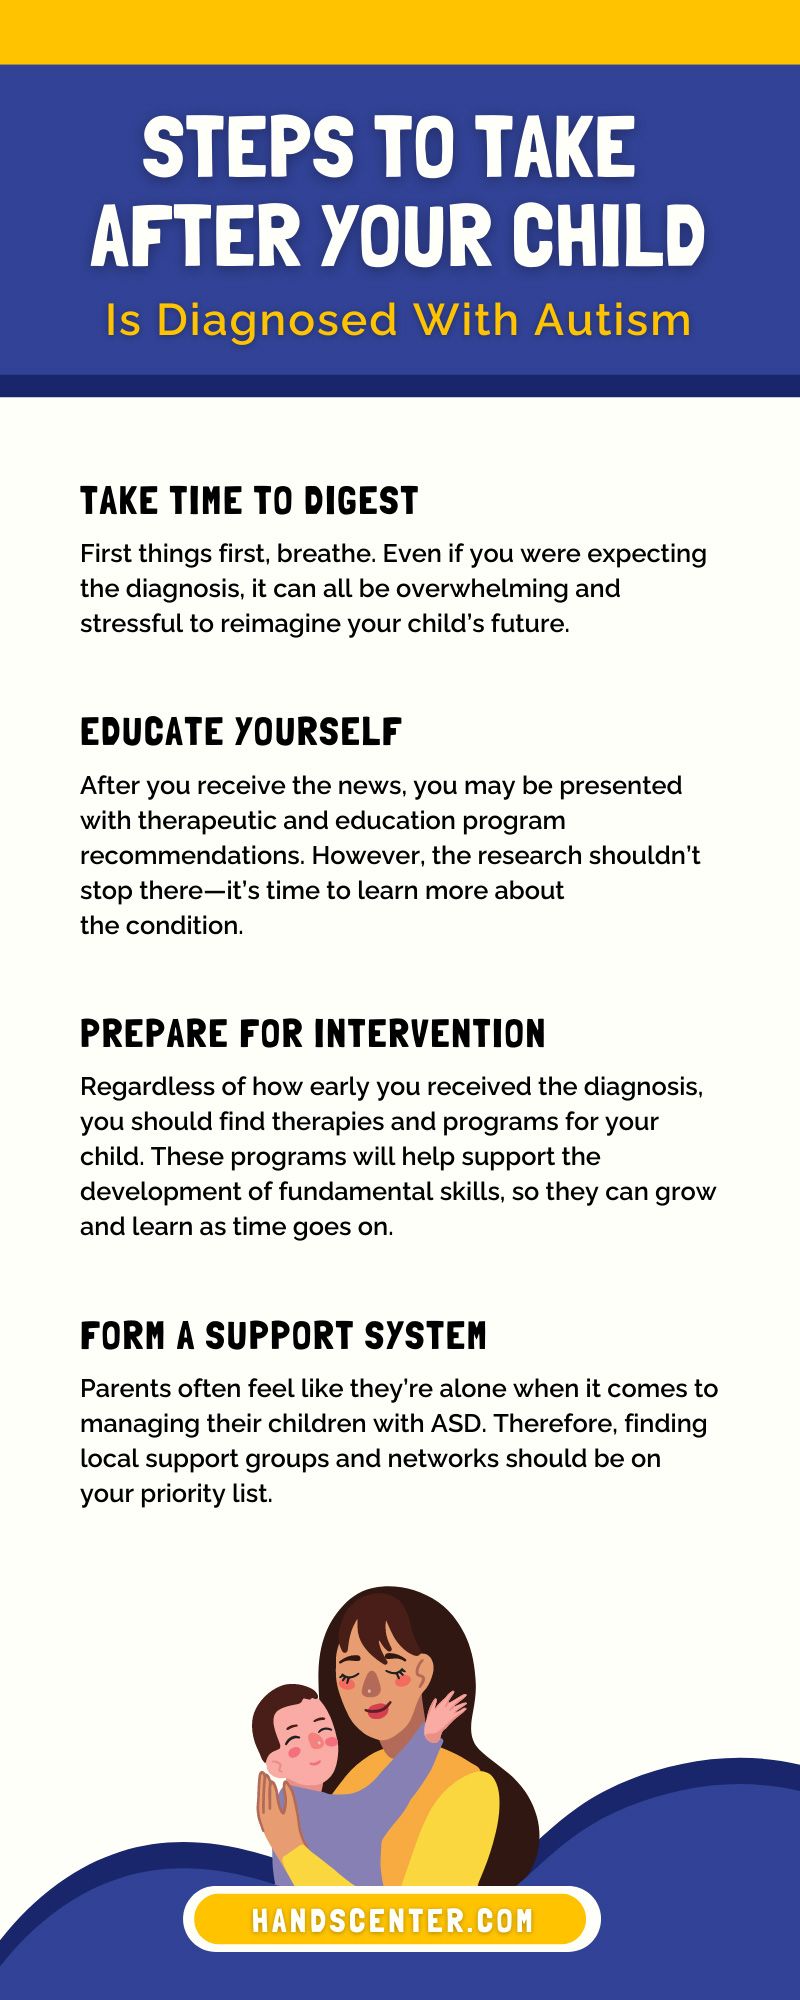 Steps To Take After Your Child Is Diagnosed With Autism